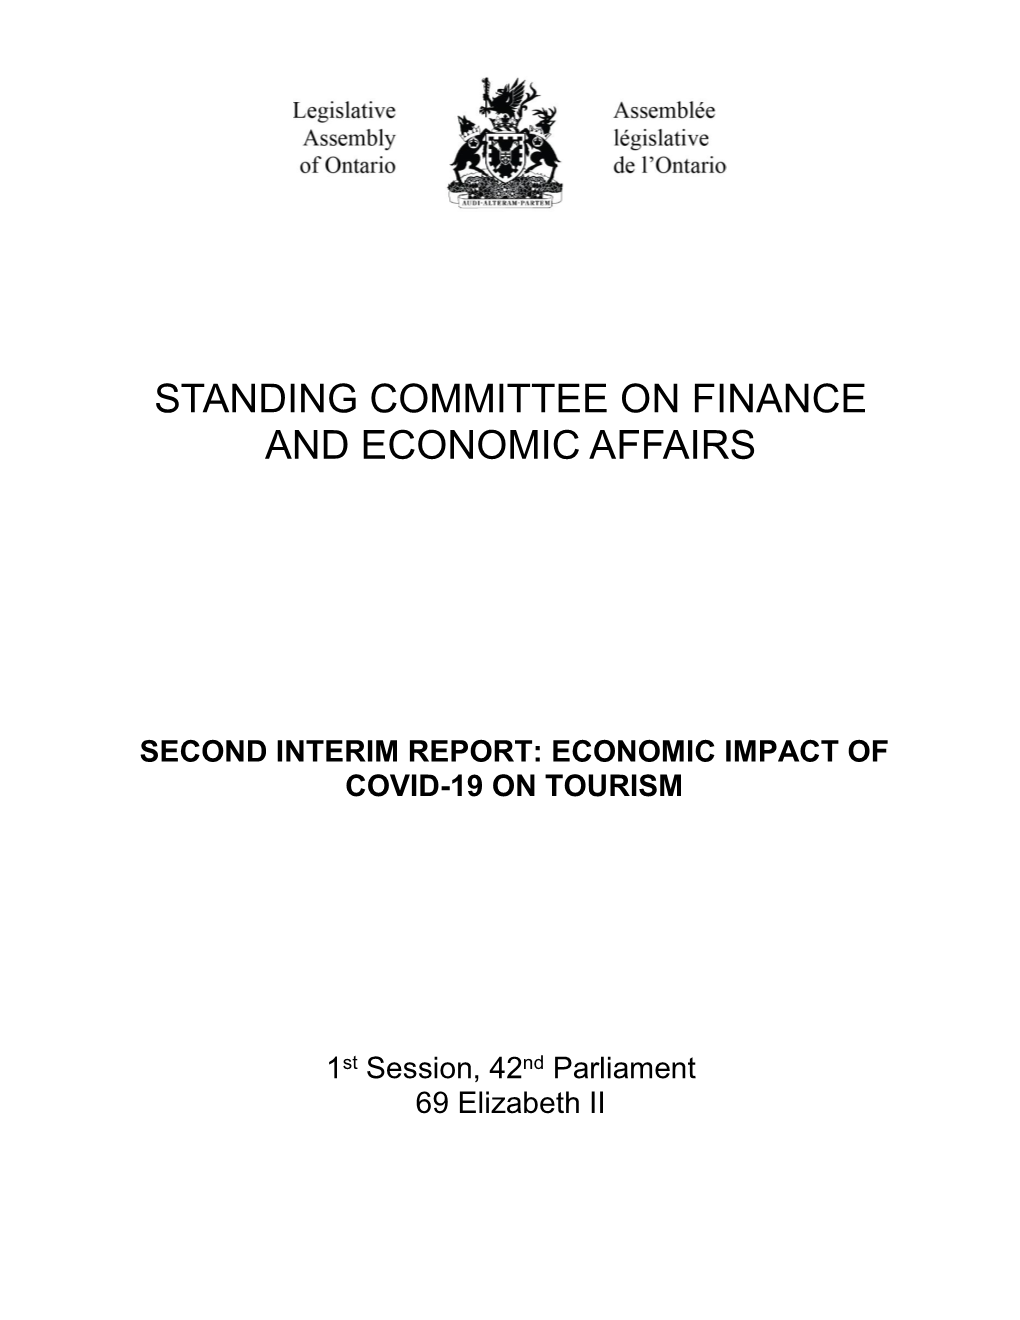 Standing Committee on Finance and Economic Affairs